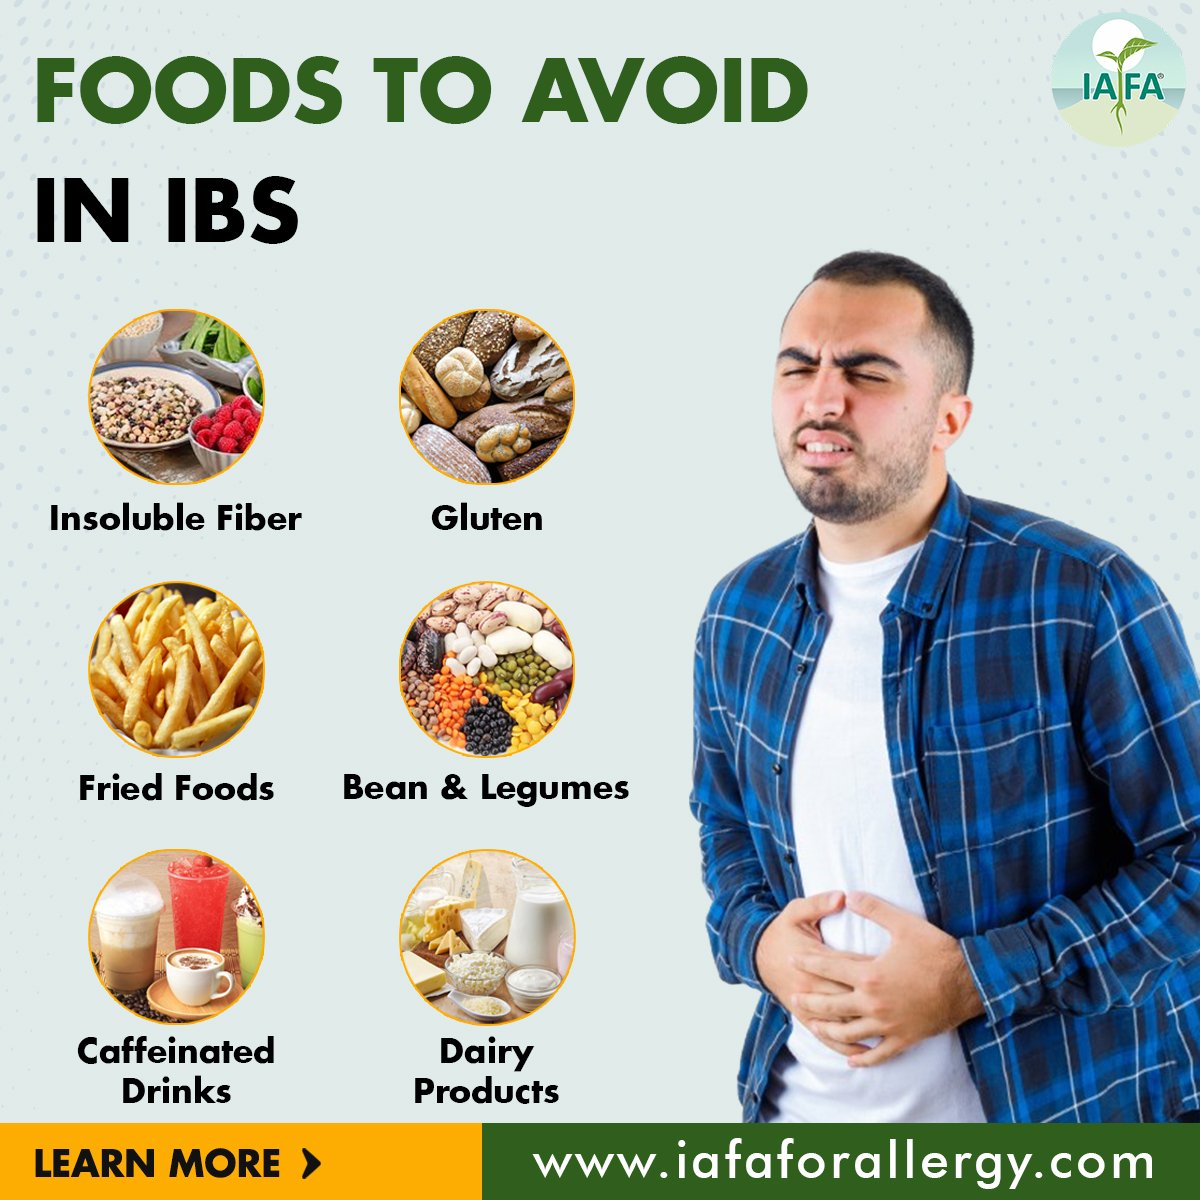 ✍️ Foods to Avoid with IBS

✅ Insoluble Fiber
✅ Gluten
✅ Caffeinated Drinks
✅ Fried Foods
✅Bean & Legumes
✅ Dairy Products

Learn More
iafaforallergy.com/diet-pathya-ap…

#ibs #ibsdiet #celiac #healthygut #butyoudontlooksick #leakygut #guthealing #glutensensitivity